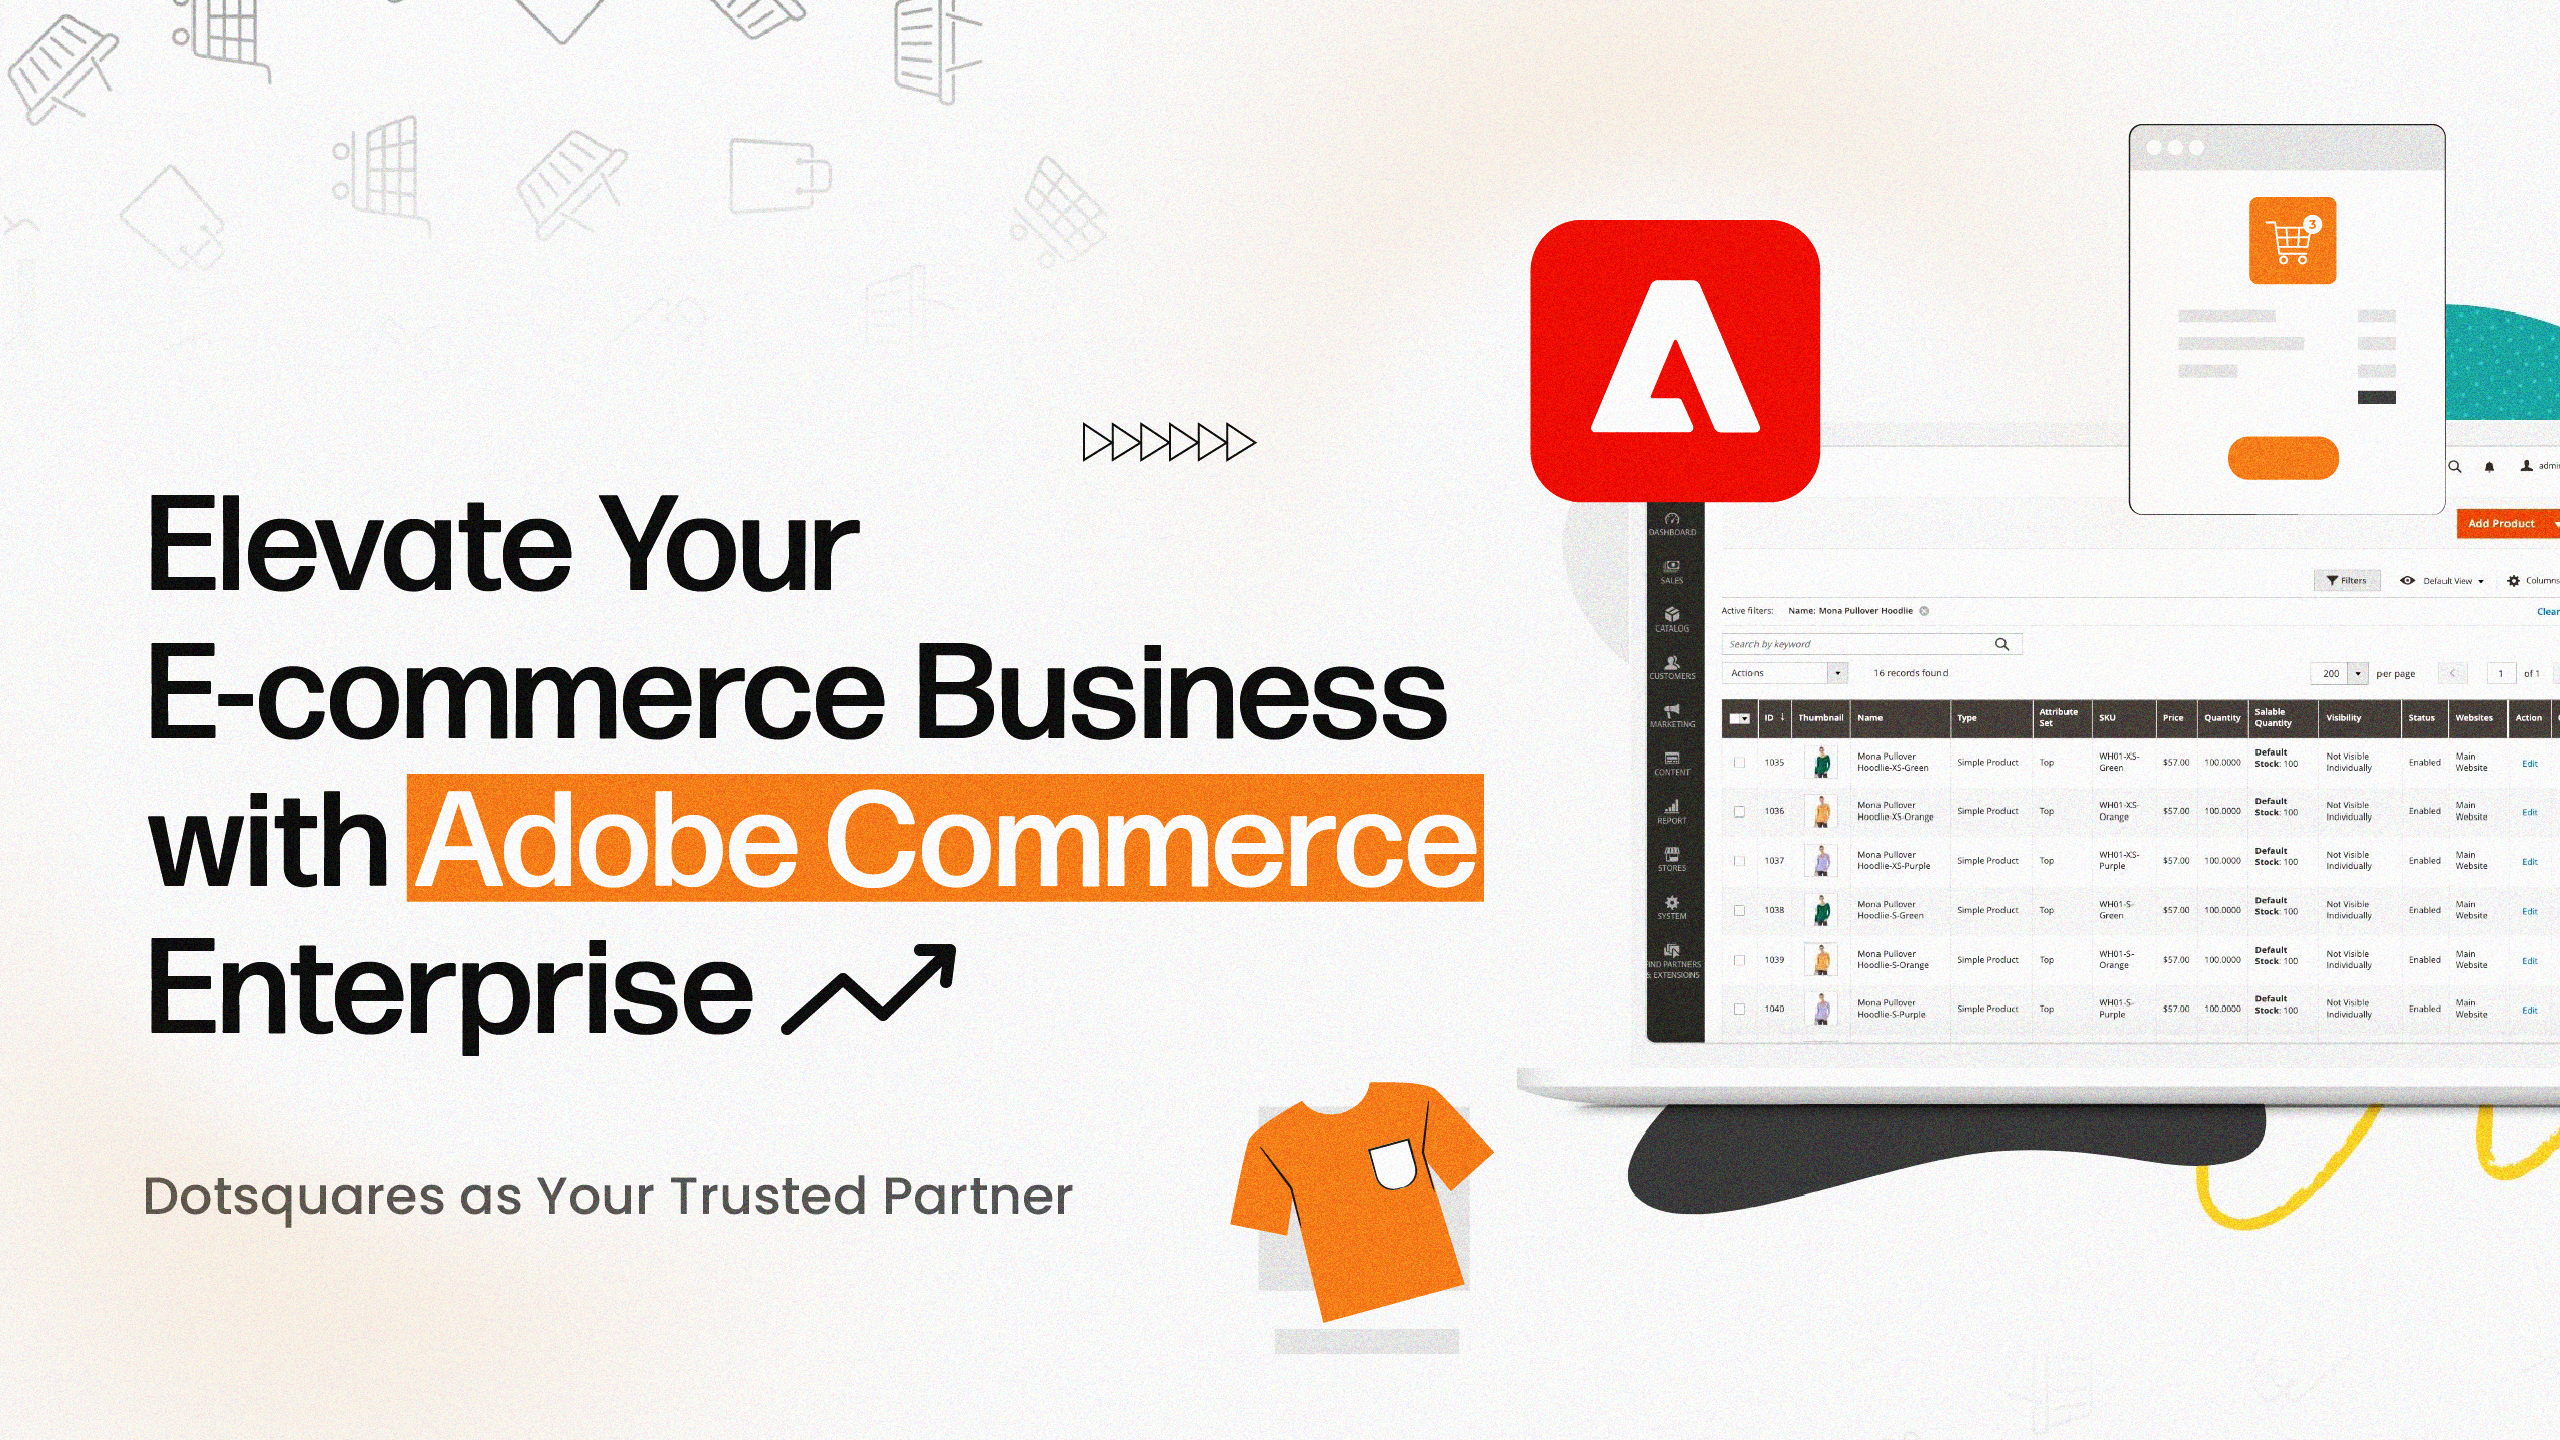 Elevate Your E-commerce Business with Adobe Commerce Enterprise: Dotsquares as Your Trusted Partner